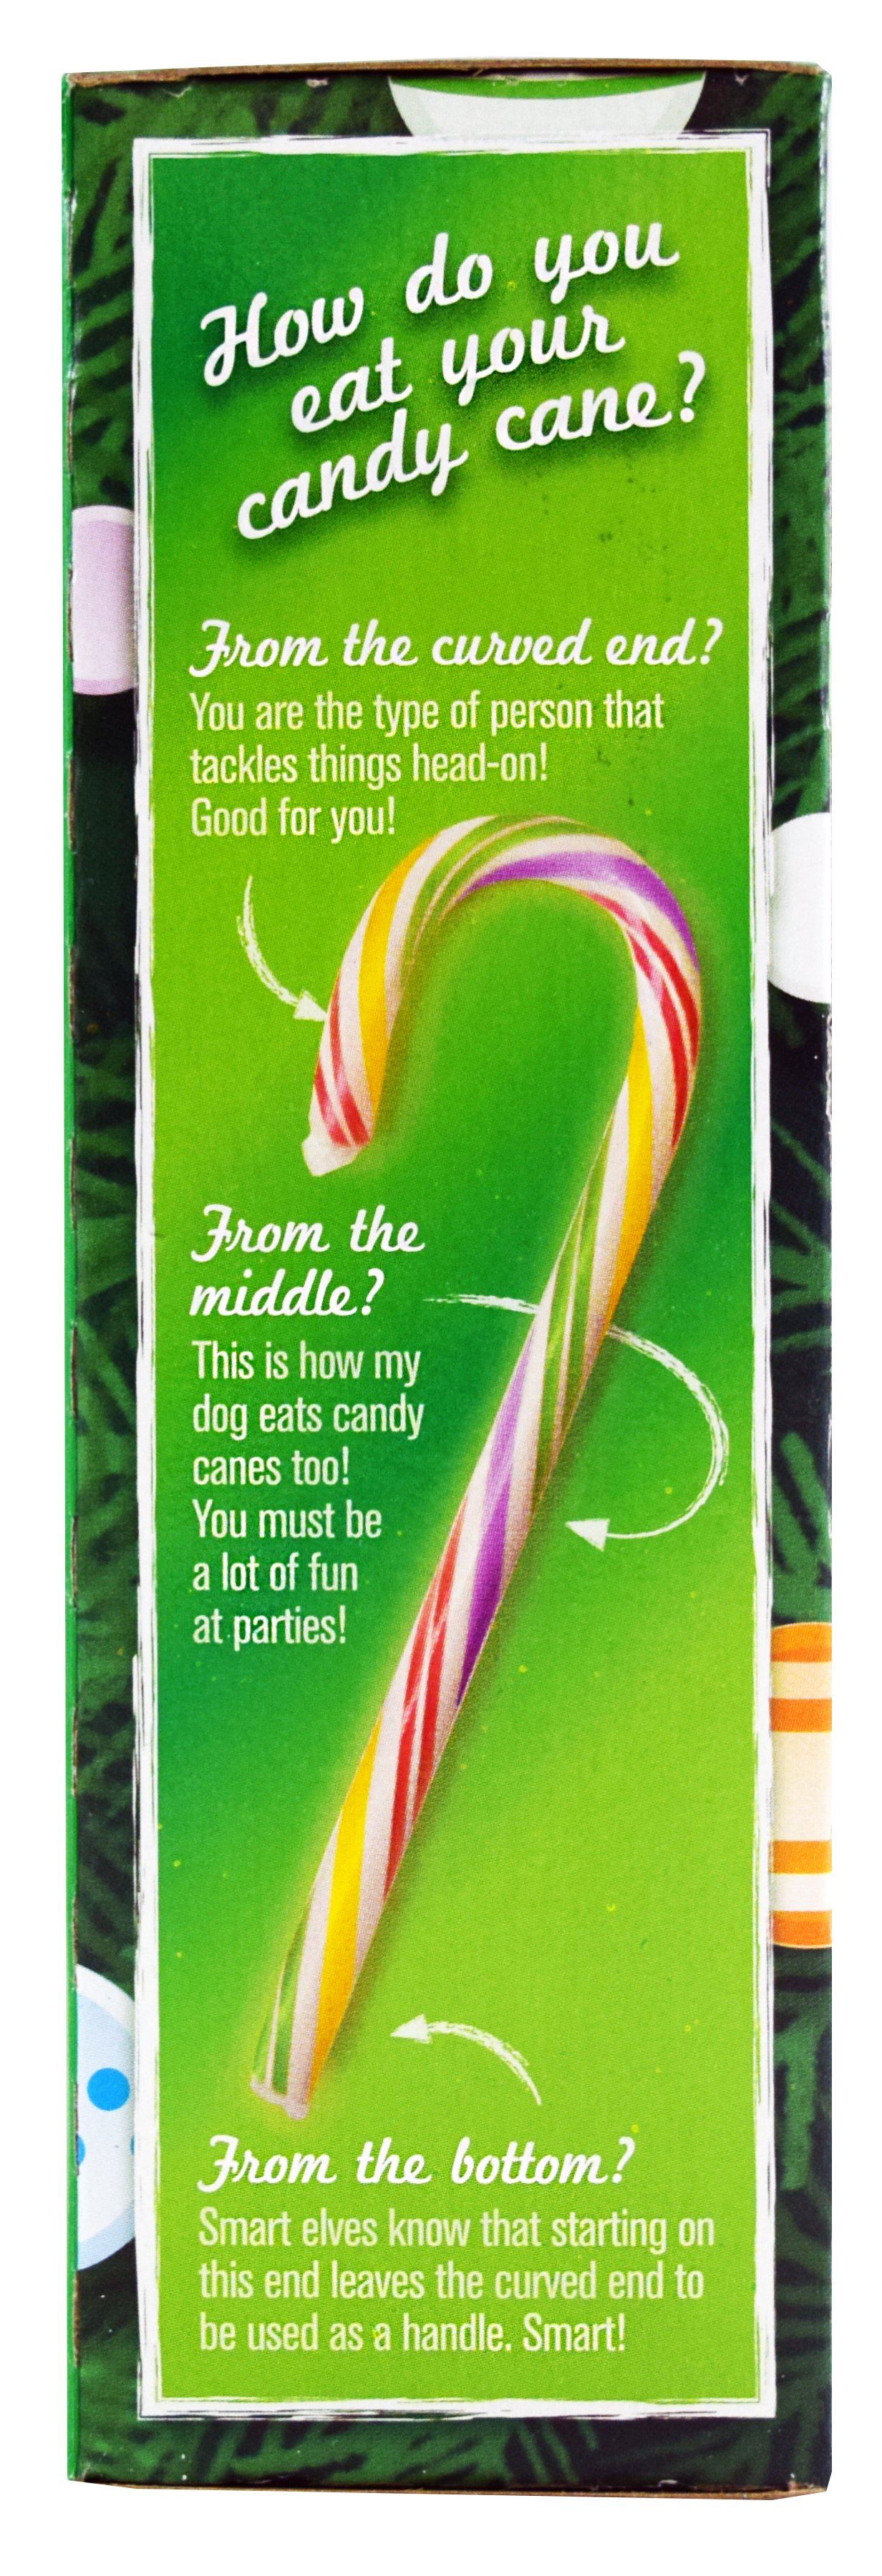 Flavored Candy Canes Spangler 